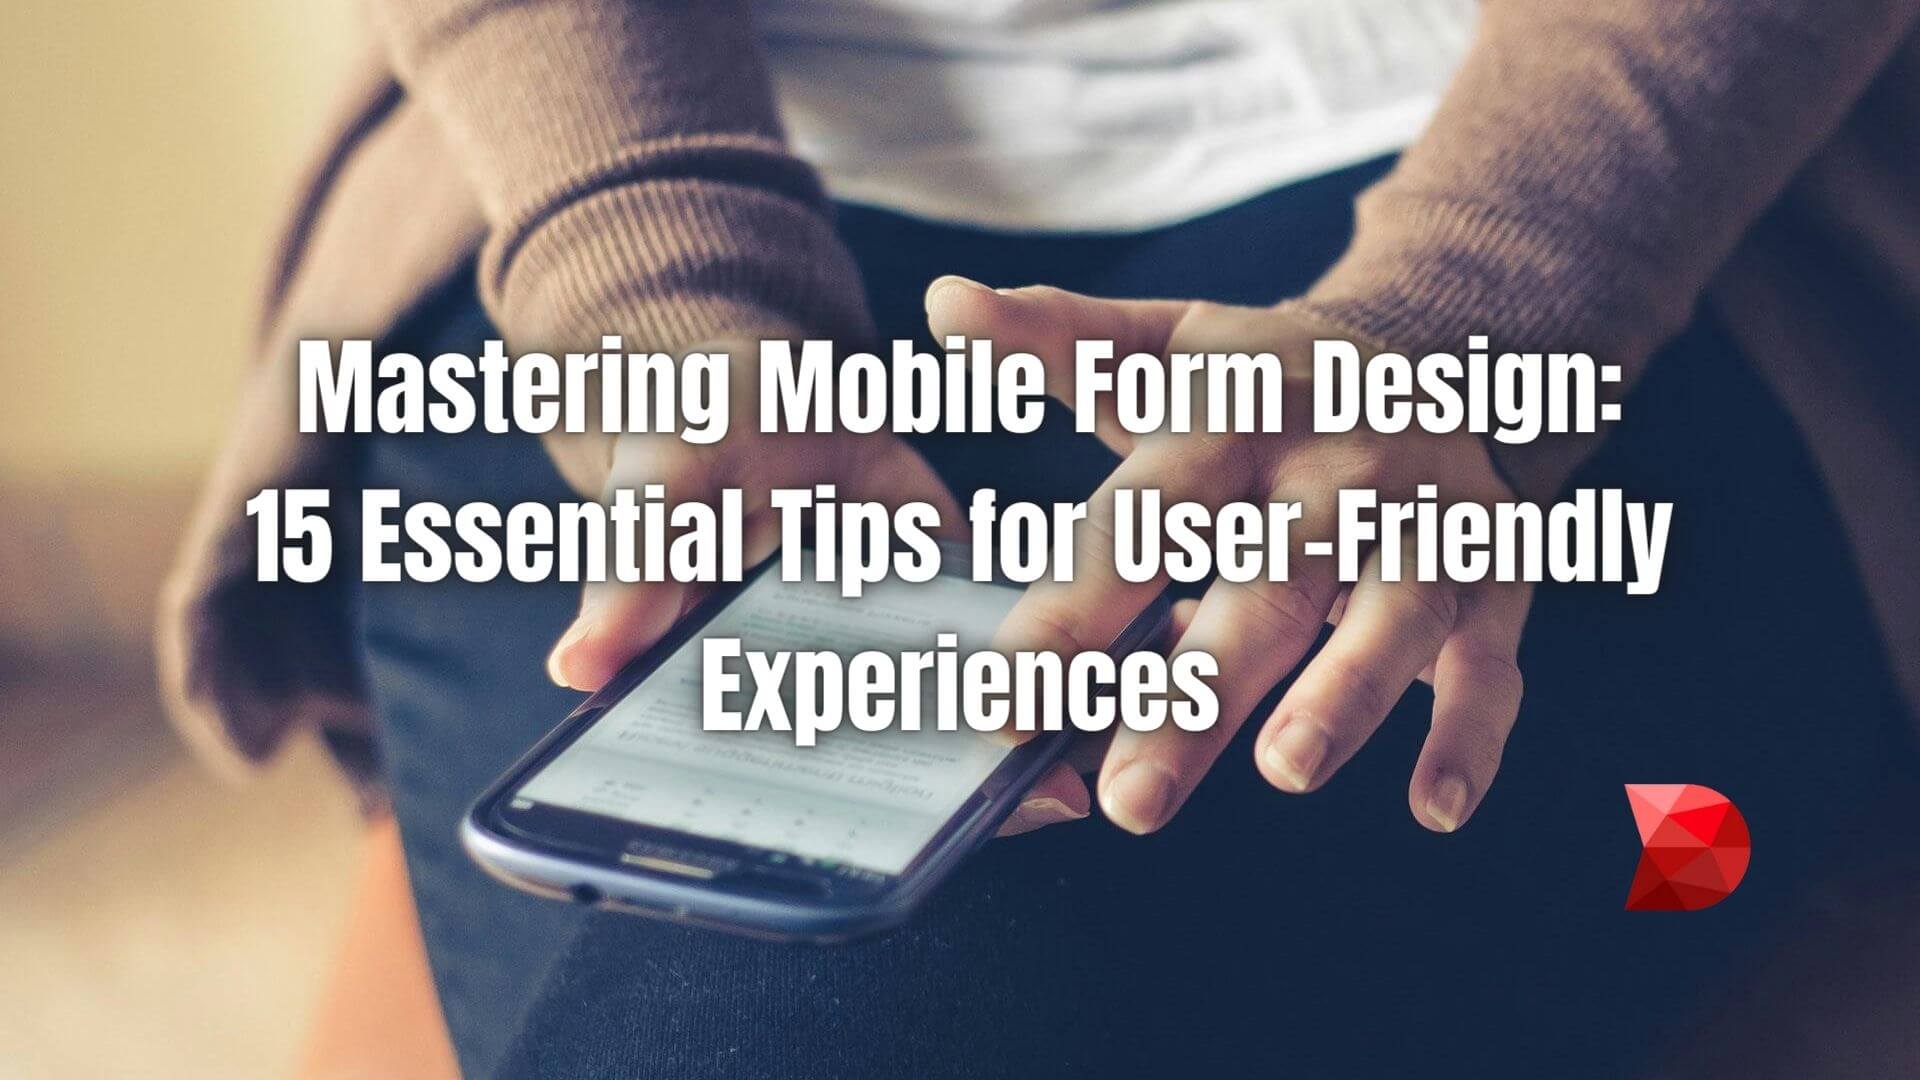 We will show you some practical yet effective techniques that will help you create your mobile form design. Read here to learn more!